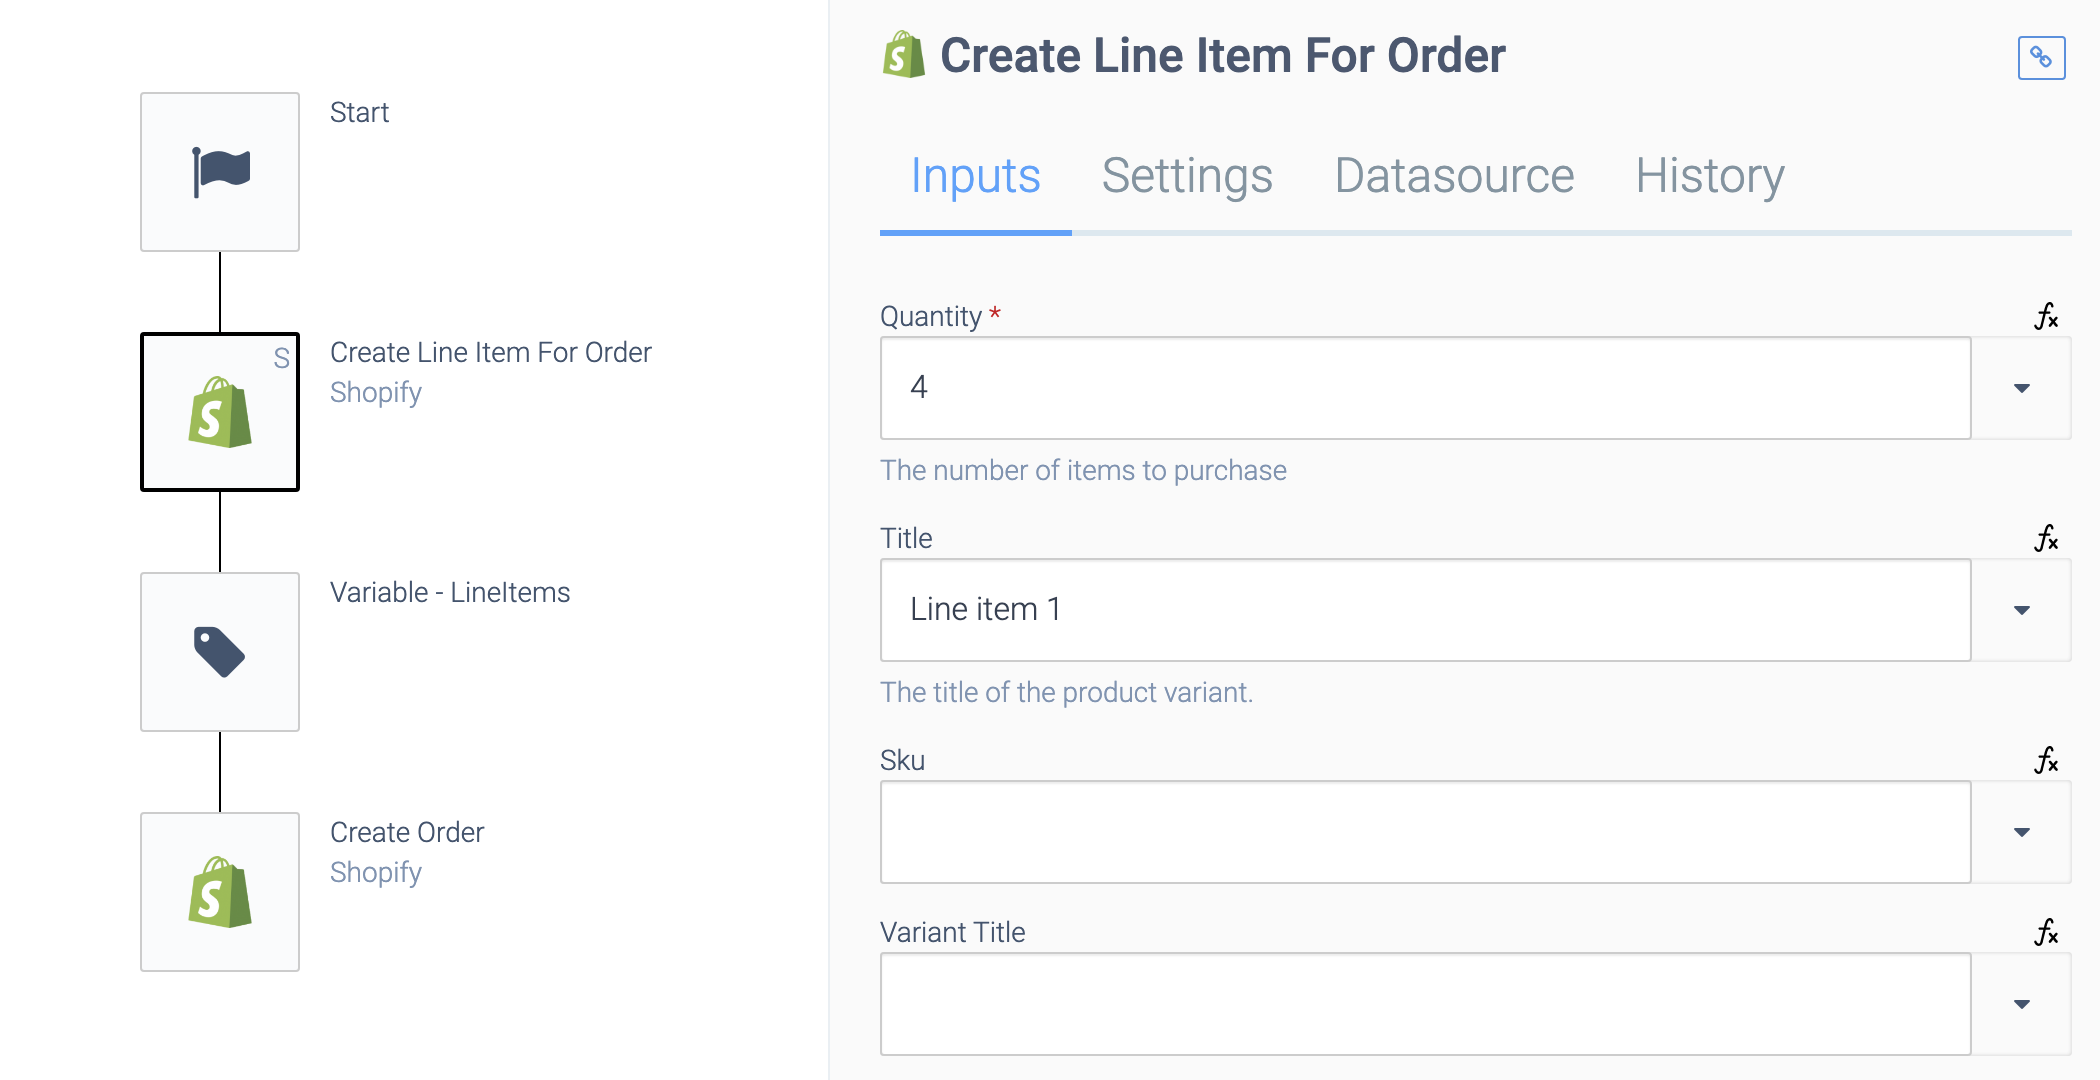 an automation consisting of a Start block, a Create Line Item For Order block, a Variable: Lineitems block, and a Create Order block. The Create line Item For Order block is selected. Quantity is set to 4.